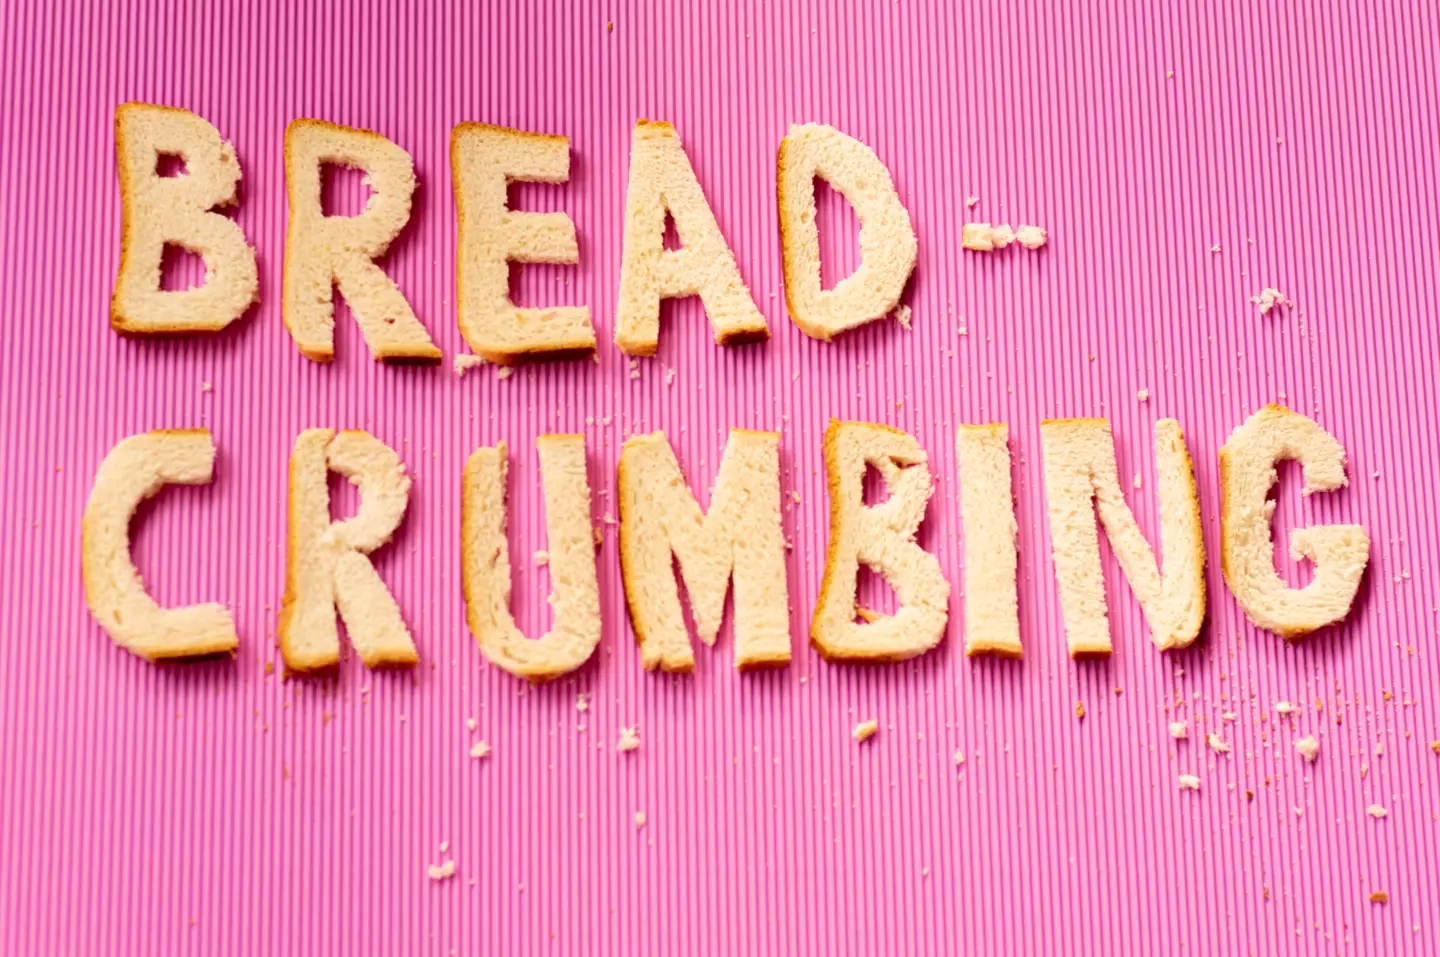 Breadcrumbing is a slow way to reel someone in.